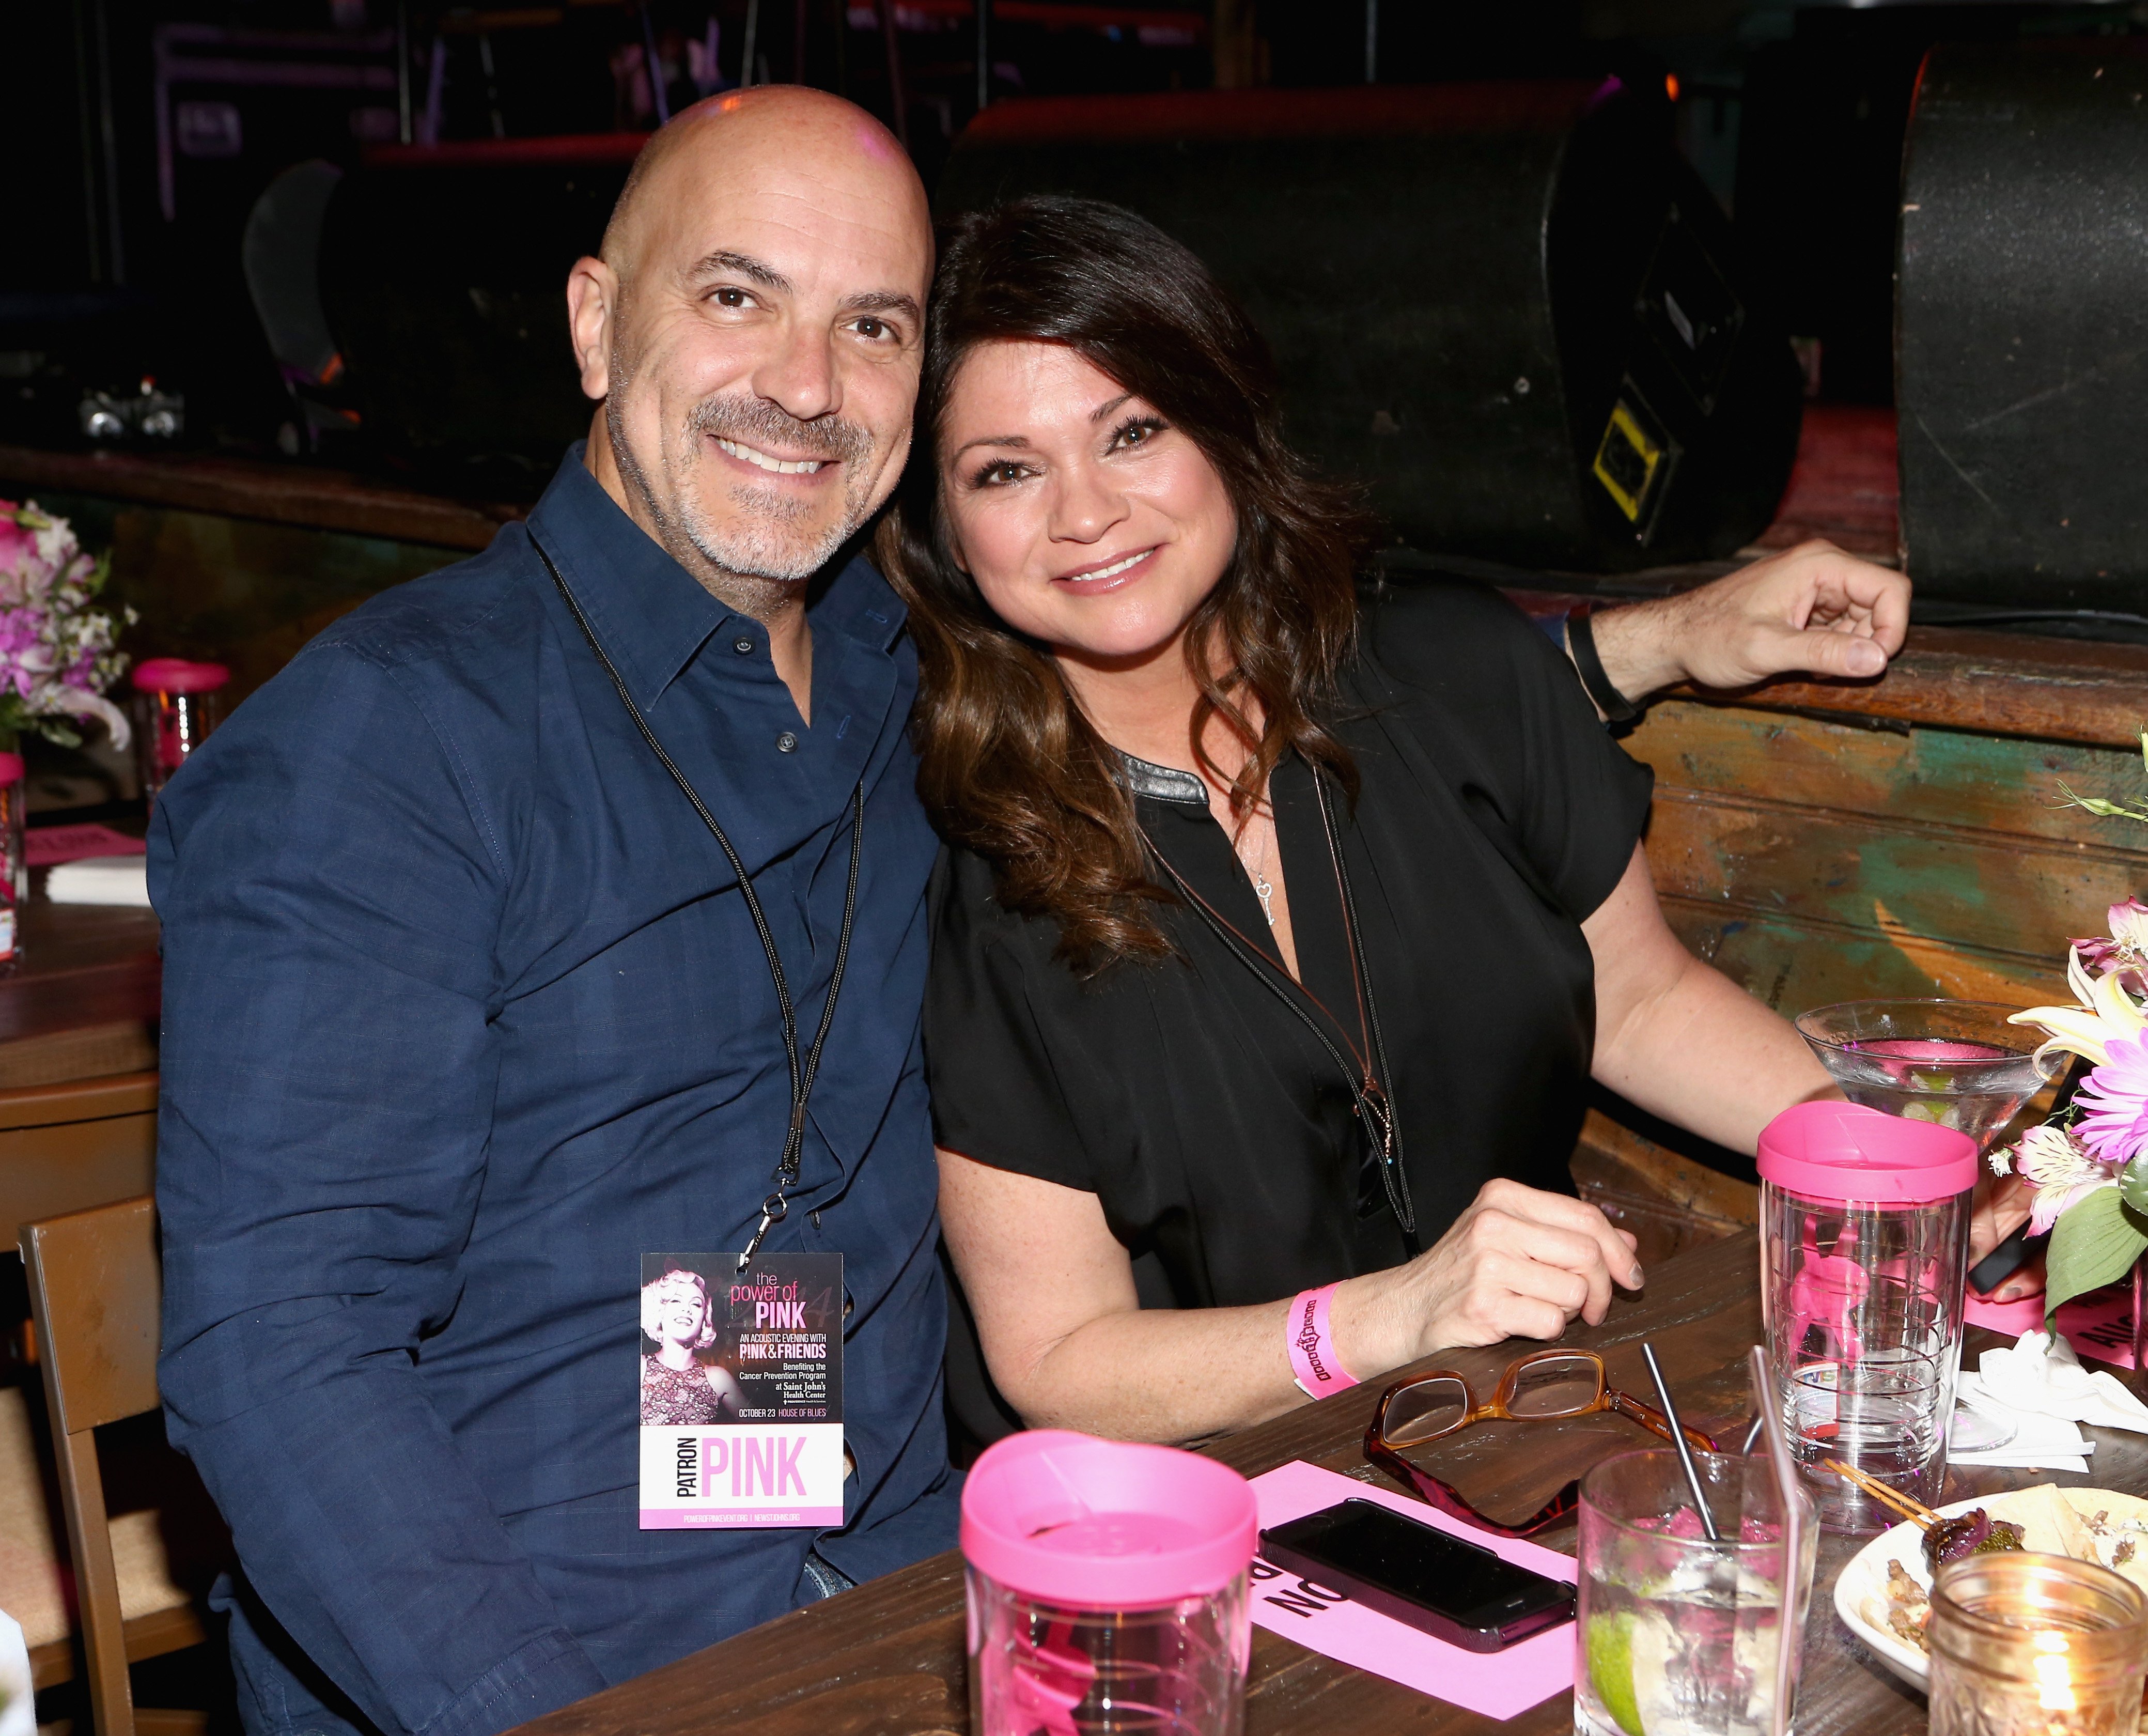 Tom Vitale and Valerie Bertinelli at Power of Pink 2014 Benefiting the Cancer Prevention Program on October 23, 2014, in West Hollywood, California | Photo: Rich Polk/Getty Images